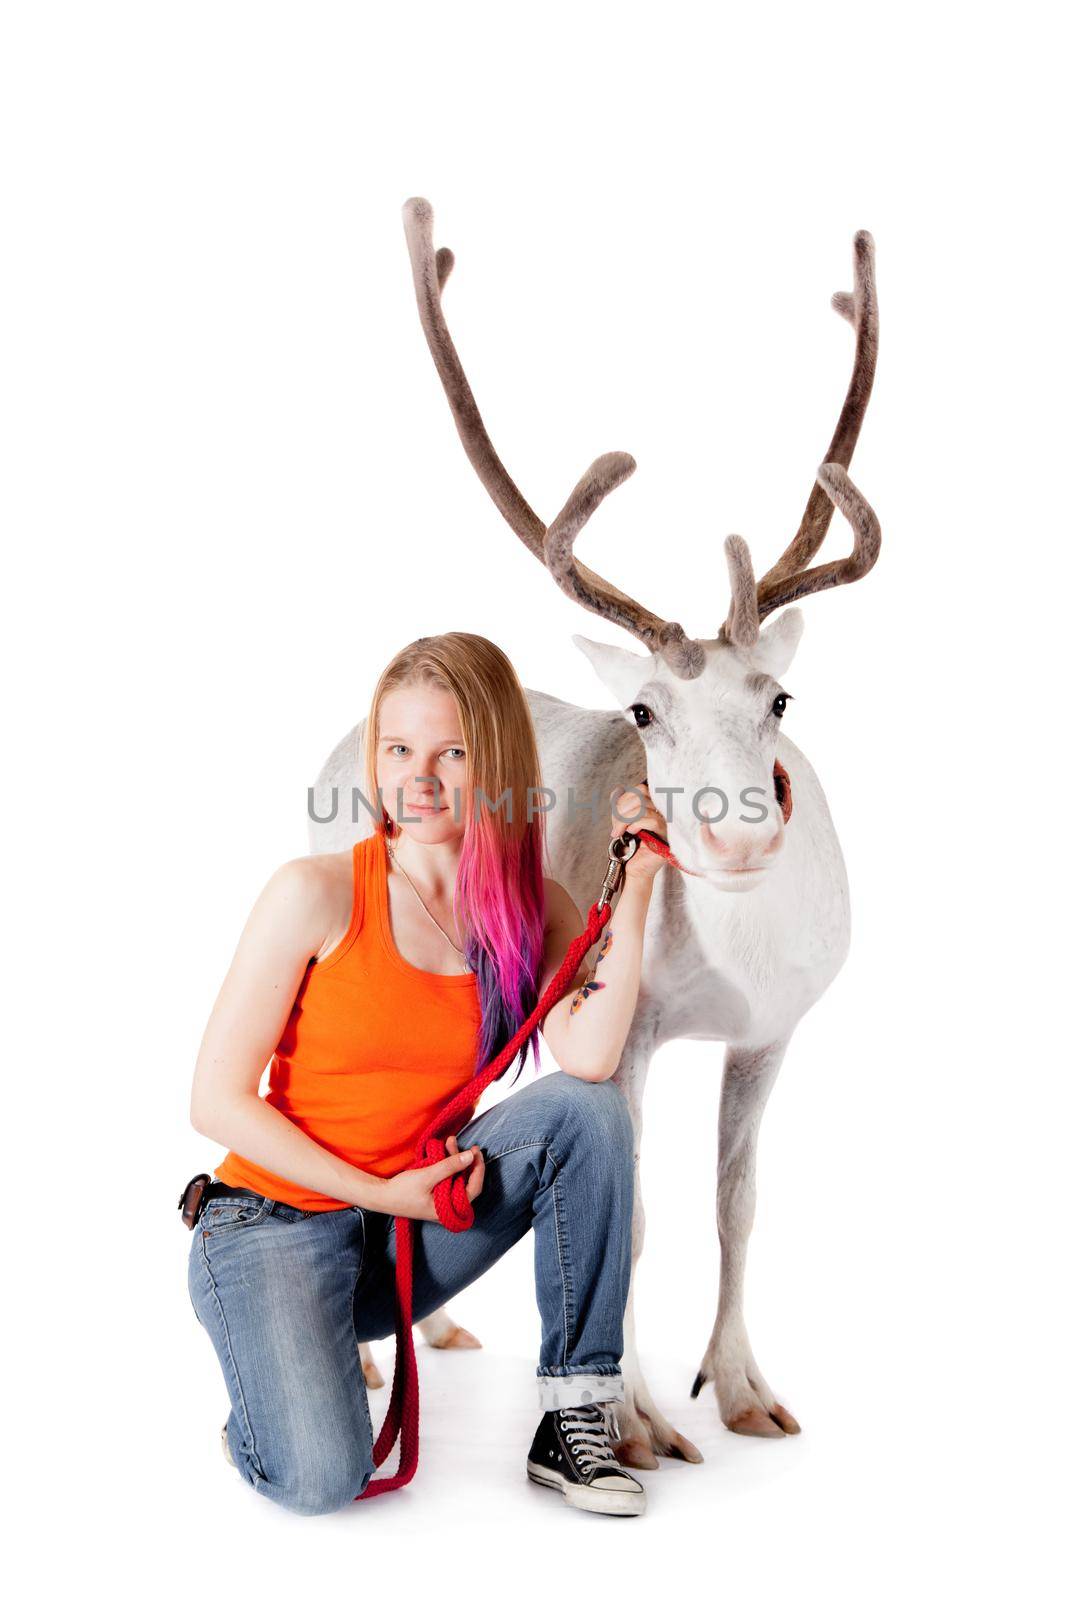 Lapland girl with caribou over white background